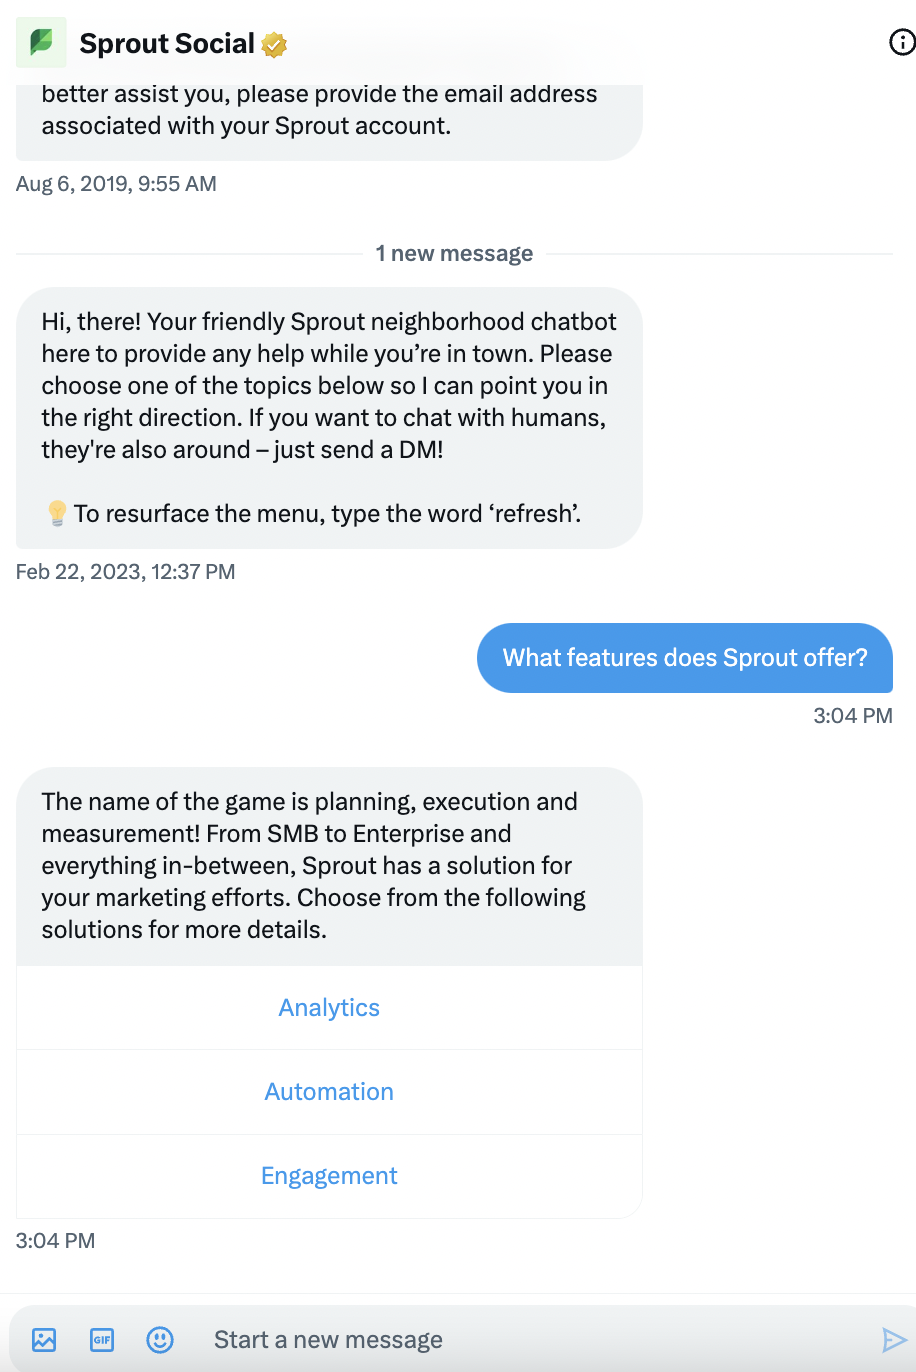 Sprout Social chatbot